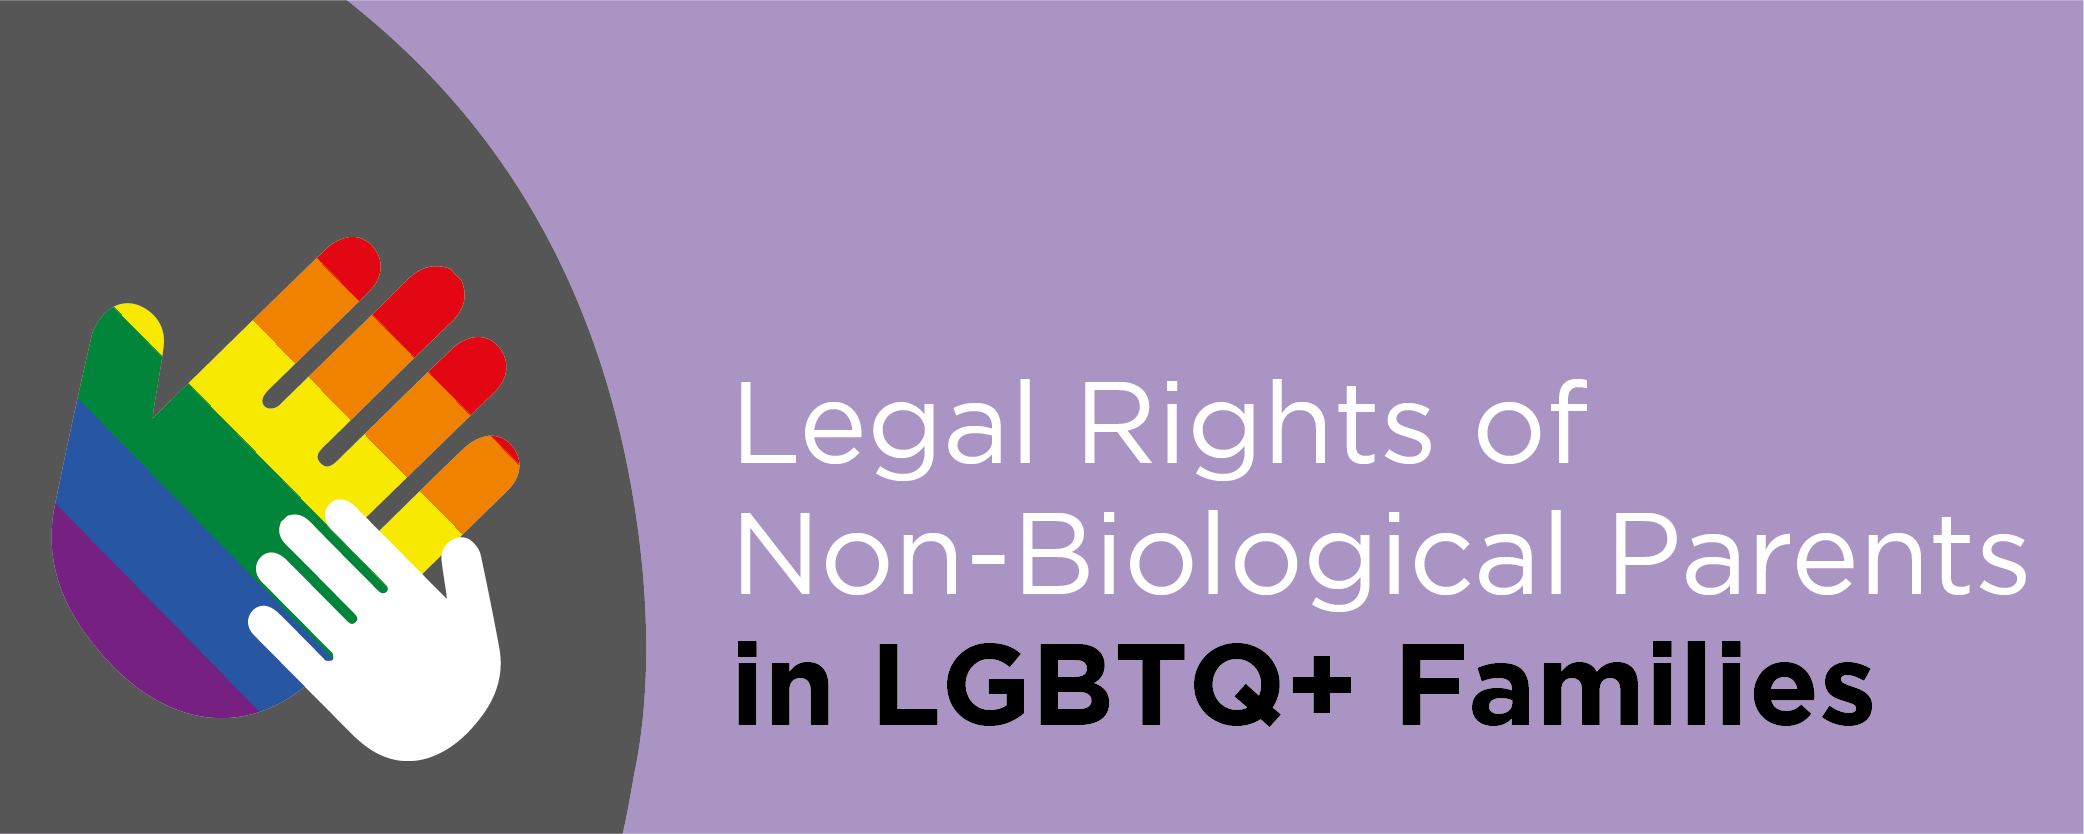 Legal Rights of Non-Biological Parents in LGBTQ+ Families